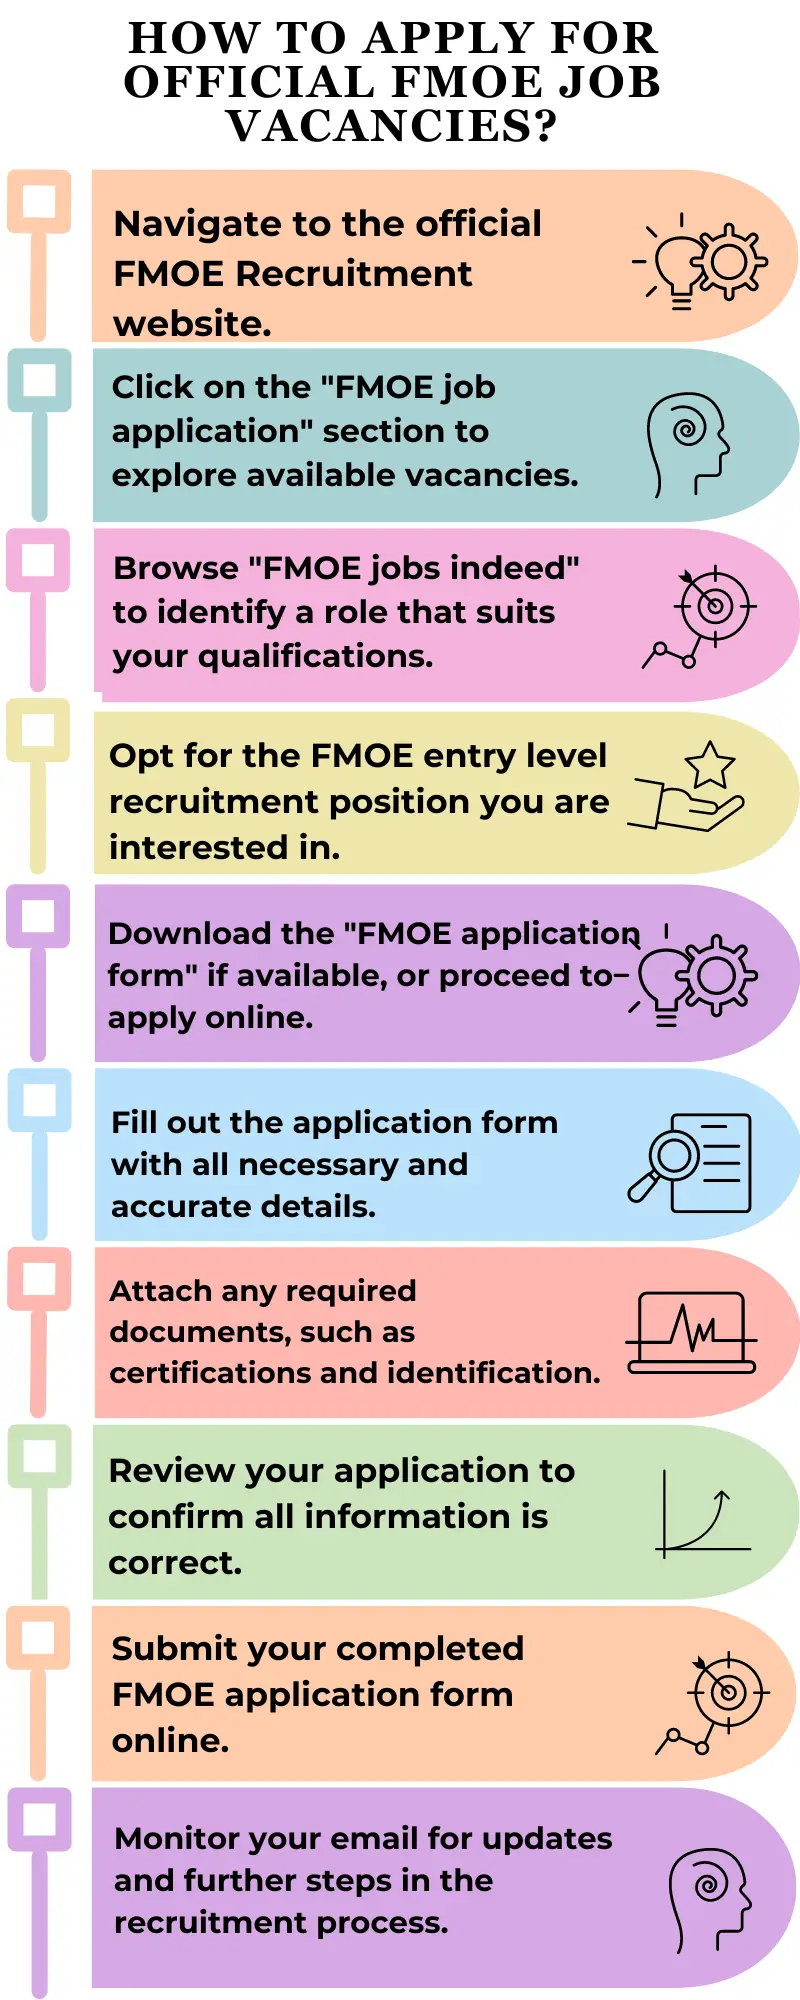 How to Apply for official FMOE Job Vacancies?